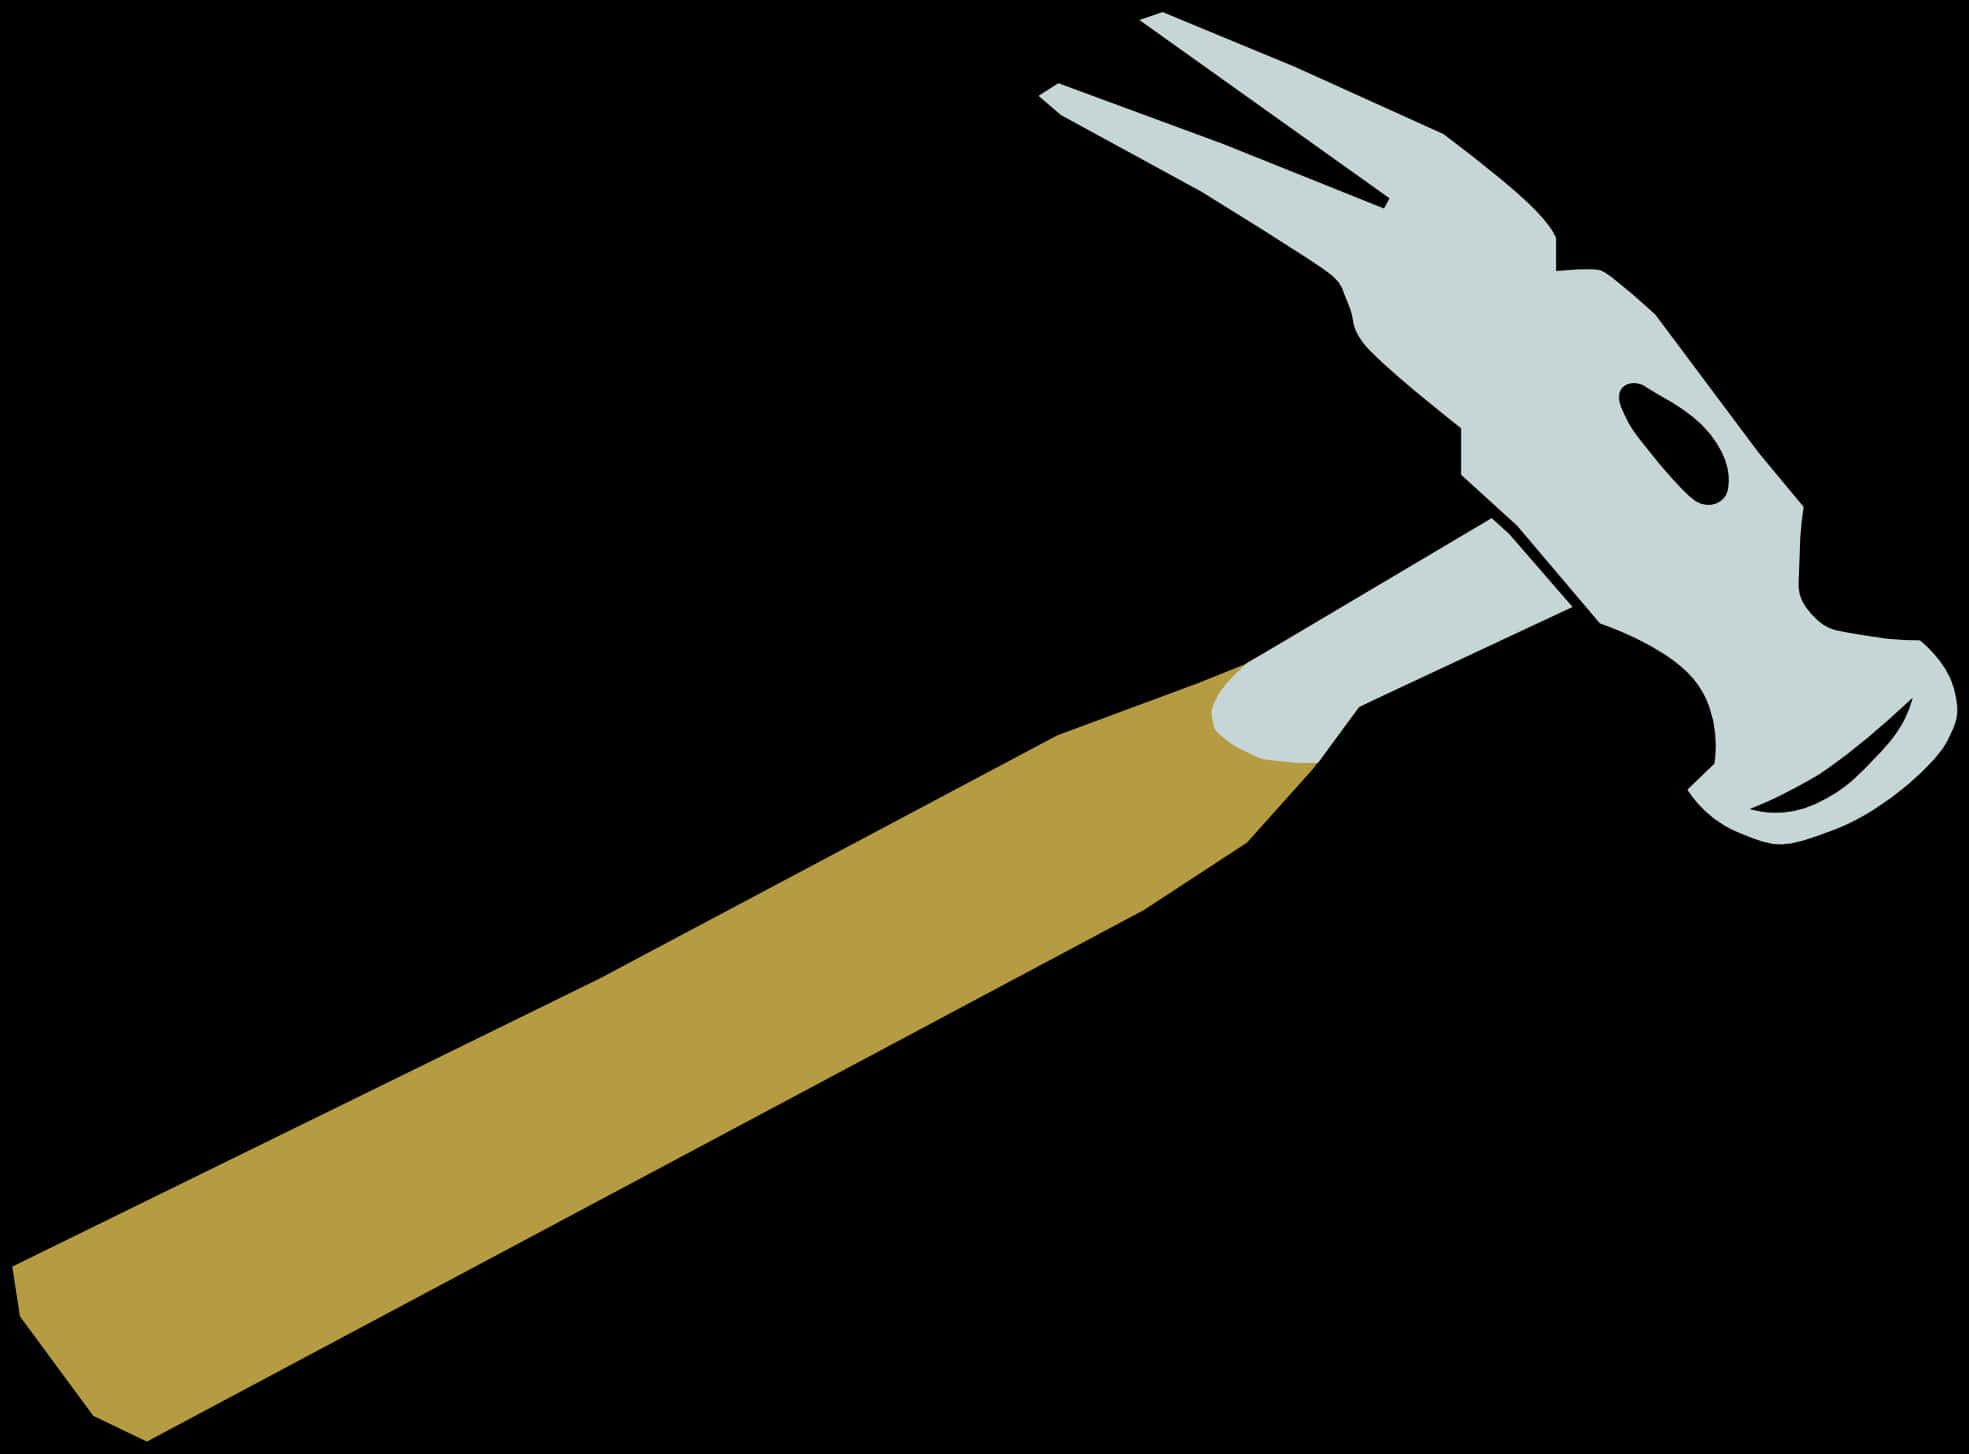 Claw Hammer Vector Illustration PNG